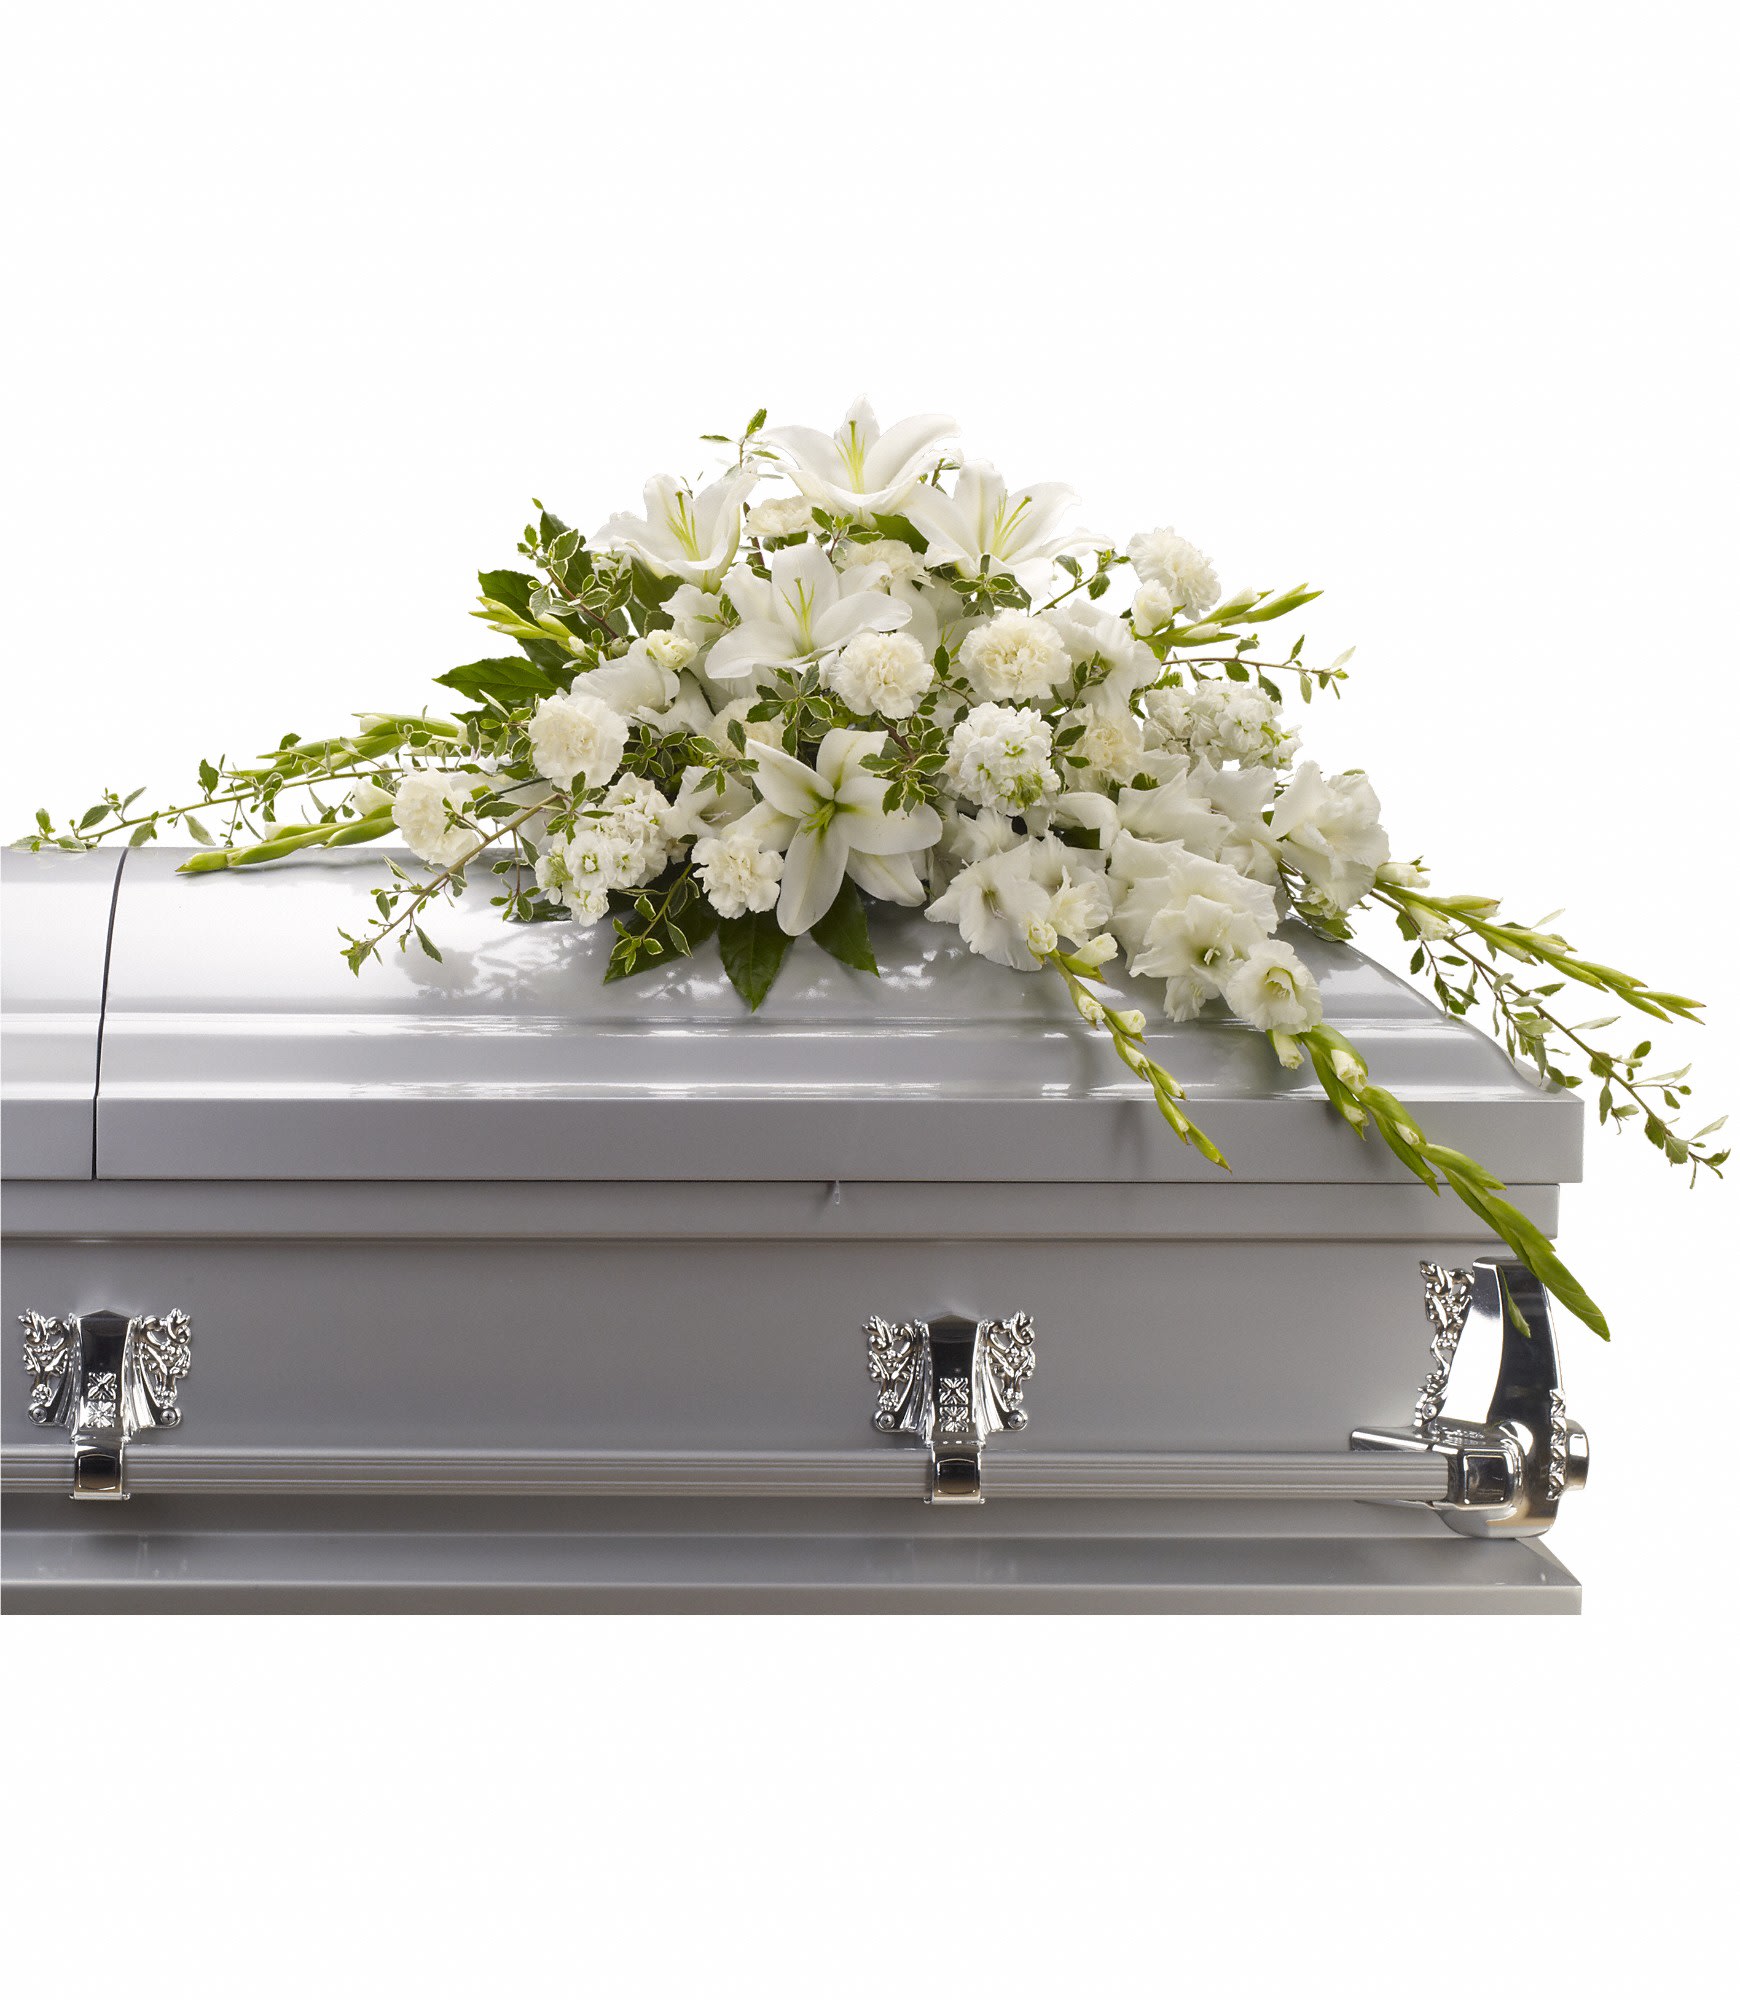 Bountiful Memories Casket Spray - A casket spray made of all white flowers and simple greenery is a simply stunning way to honor the deceased while bringing a quiet strength and serenity to those present. 